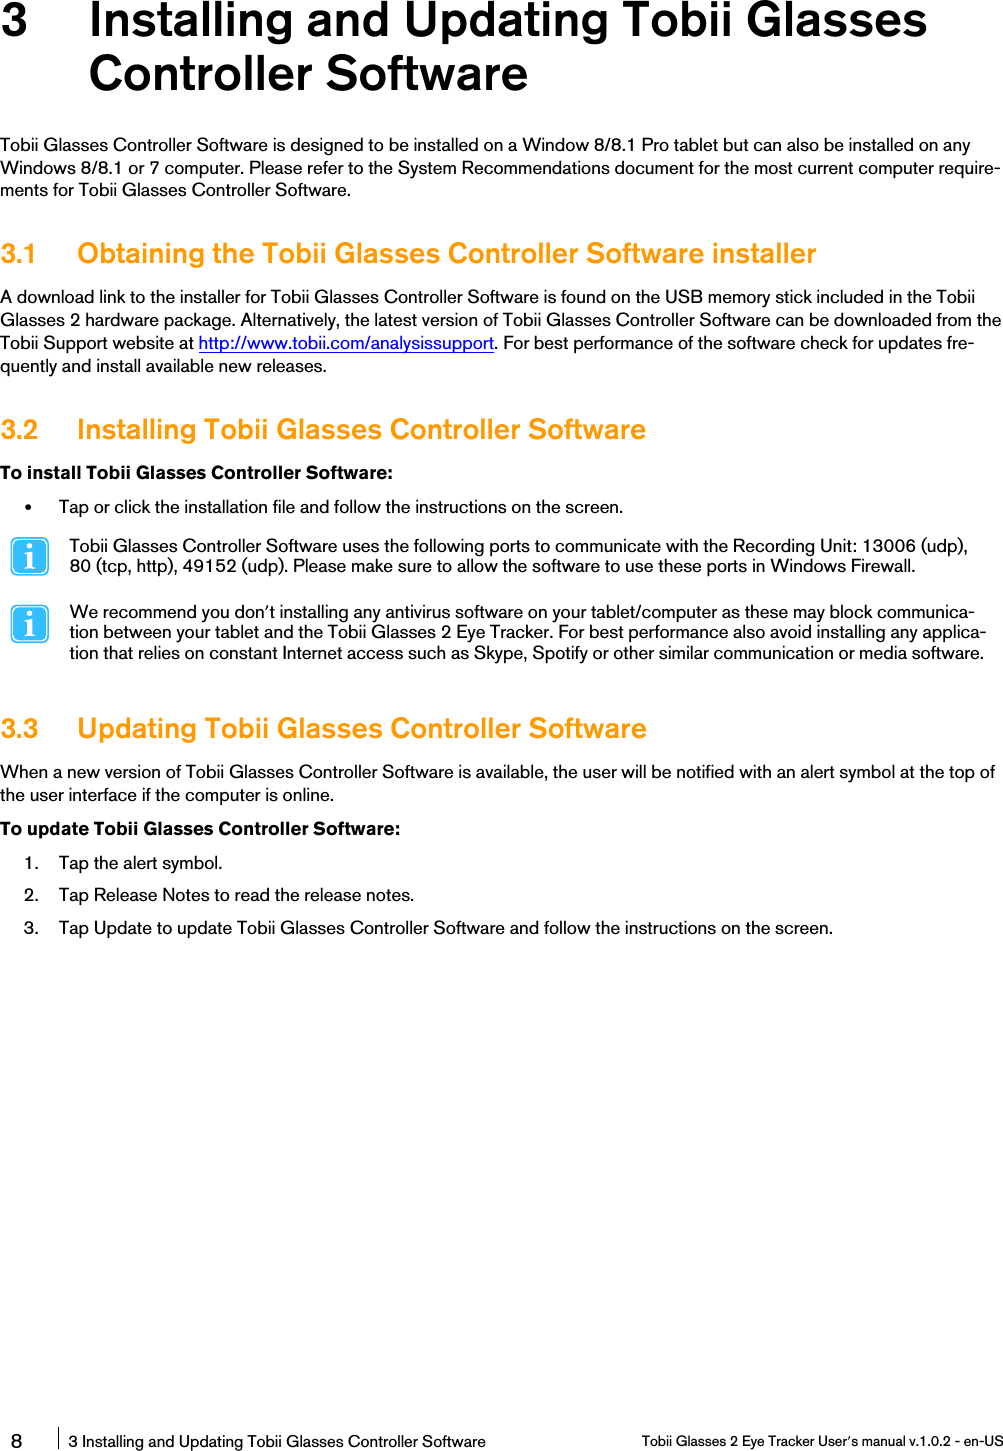 3 Installing and Updating Tobii GlassesController SoftwareTobii Glasses Controller Software is designed to be installed on a Window 8/8.1 Pro tablet but can also be installed on anyWindows 8/8.1 or 7 computer. Please refer to the System Recommendations document for the most current computer require-ments for Tobii Glasses Controller Software.3.1 Obtaining the Tobii Glasses Controller Software installerA download link to the installer for Tobii Glasses Controller Software is found on the USB memory stick included in the TobiiGlasses 2 hardware package. Alternatively, the latest version of Tobii Glasses Controller Software can be downloaded from theTobii Support website at http://www.tobii.com/analysissupport. For best performance of the software check for updates fre-quently and install available new releases.3.2 Installing Tobii Glasses Controller SoftwareTo install Tobii Glasses Controller Software:•Tap or click the installation file and follow the instructions on the screen.Tobii Glasses Controller Software uses the following ports to communicate with the Recording Unit: 13006 (udp),80 (tcp, http), 49152 (udp). Please make sure to allow the software to use these ports in Windows Firewall.We recommend you don’t installing any antivirus software on your tablet/computer as these may block communica-tion between your tablet and the Tobii Glasses 2 Eye Tracker. For best performance also avoid installing any applica-tion that relies on constant Internet access such as Skype, Spotify or other similar communication or media software.3.3 Updating Tobii Glasses Controller SoftwareWhen a new version of Tobii Glasses Controller Software is available, the user will be notified with an alert symbol at the top ofthe user interface if the computer is online.To update Tobii Glasses Controller Software:1. Tap the alert symbol.2. Tap Release Notes to read the release notes.3. Tap Update to update Tobii Glasses Controller Software and follow the instructions on the screen.83 Installing and Updating Tobii Glasses Controller Software Tobii Glasses 2 Eye Tracker User’s manual v.1.0.2 - en-US